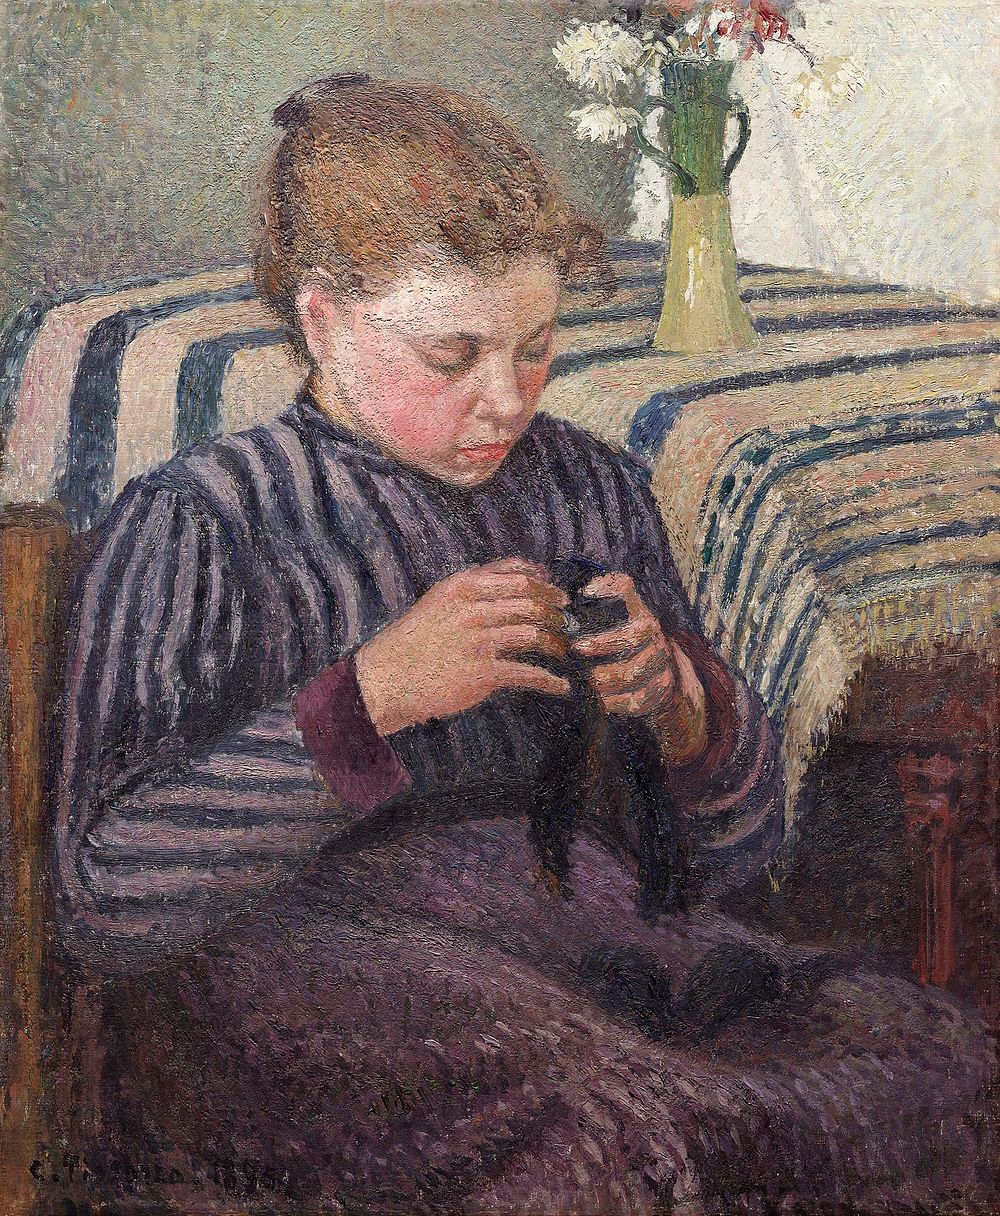 Woman Mending (1895) by Camille Pissarro. Original from The Art Institute of Chicago. Digitally enhanced by rawpixel.